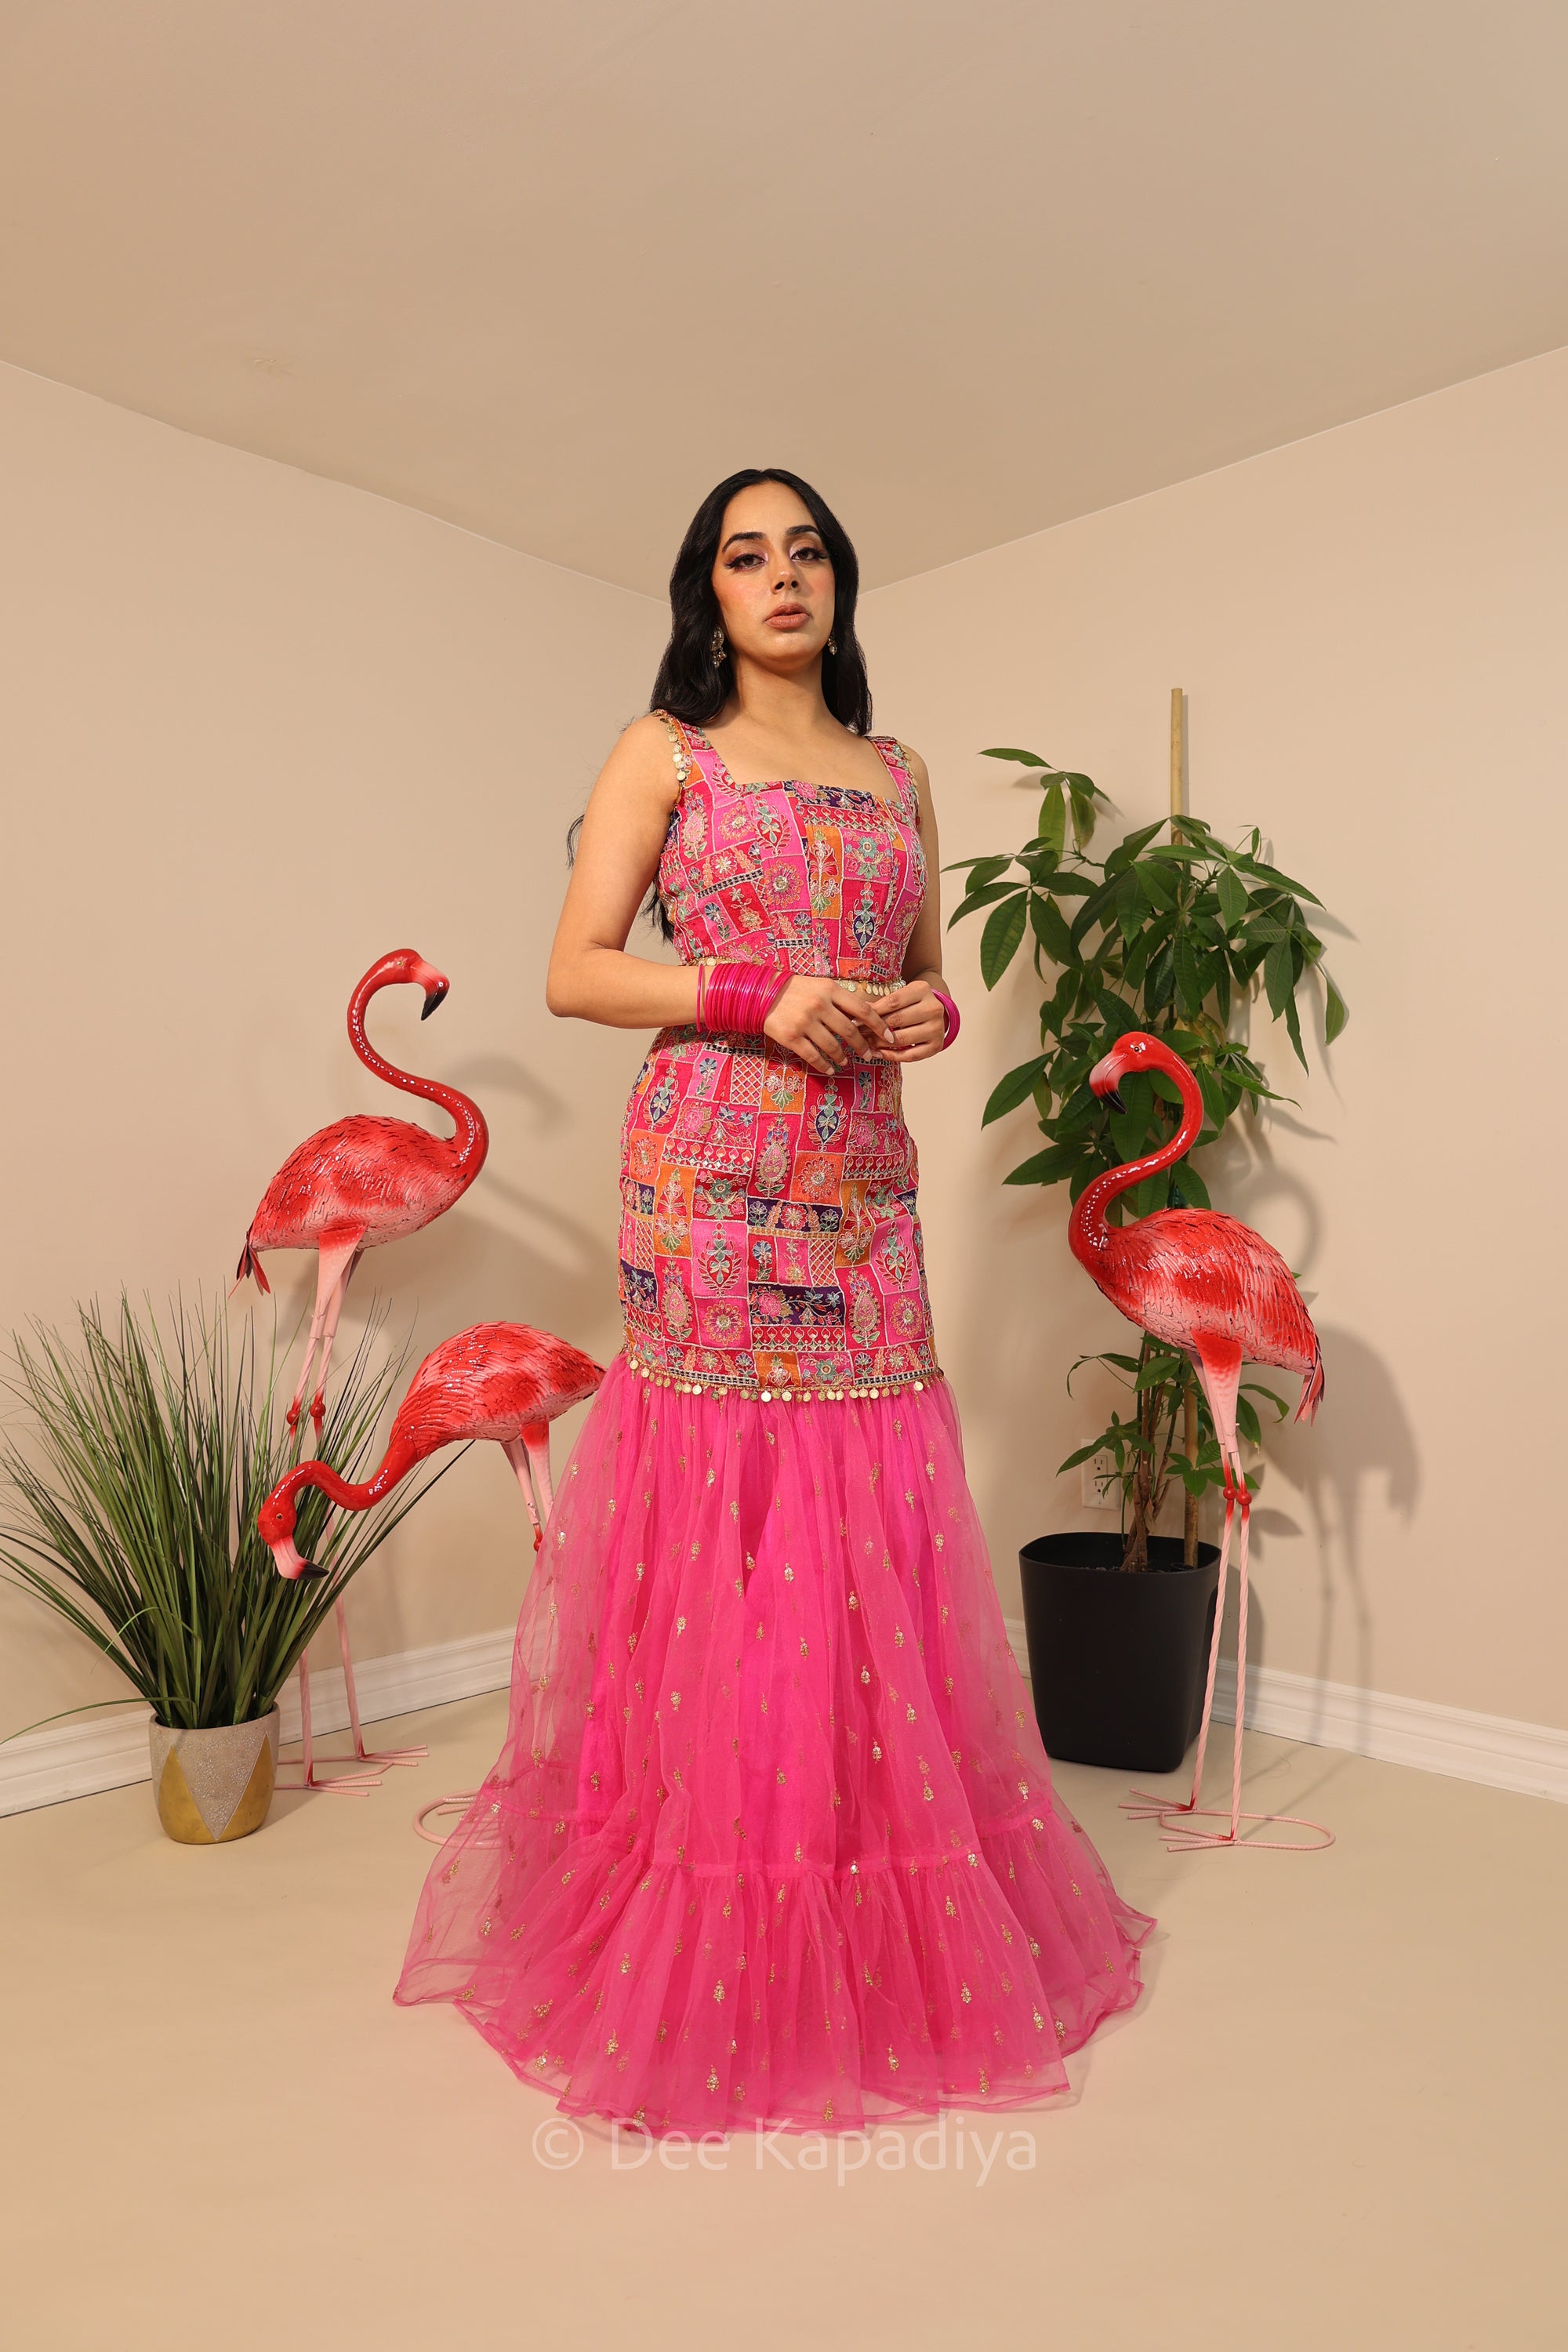 Simran from DDLJ, a fun, pretty and quirky hot pink multicoloured corset and mermaid lehenga set for fiesta, mehendi, welcome dinner, sangeet event